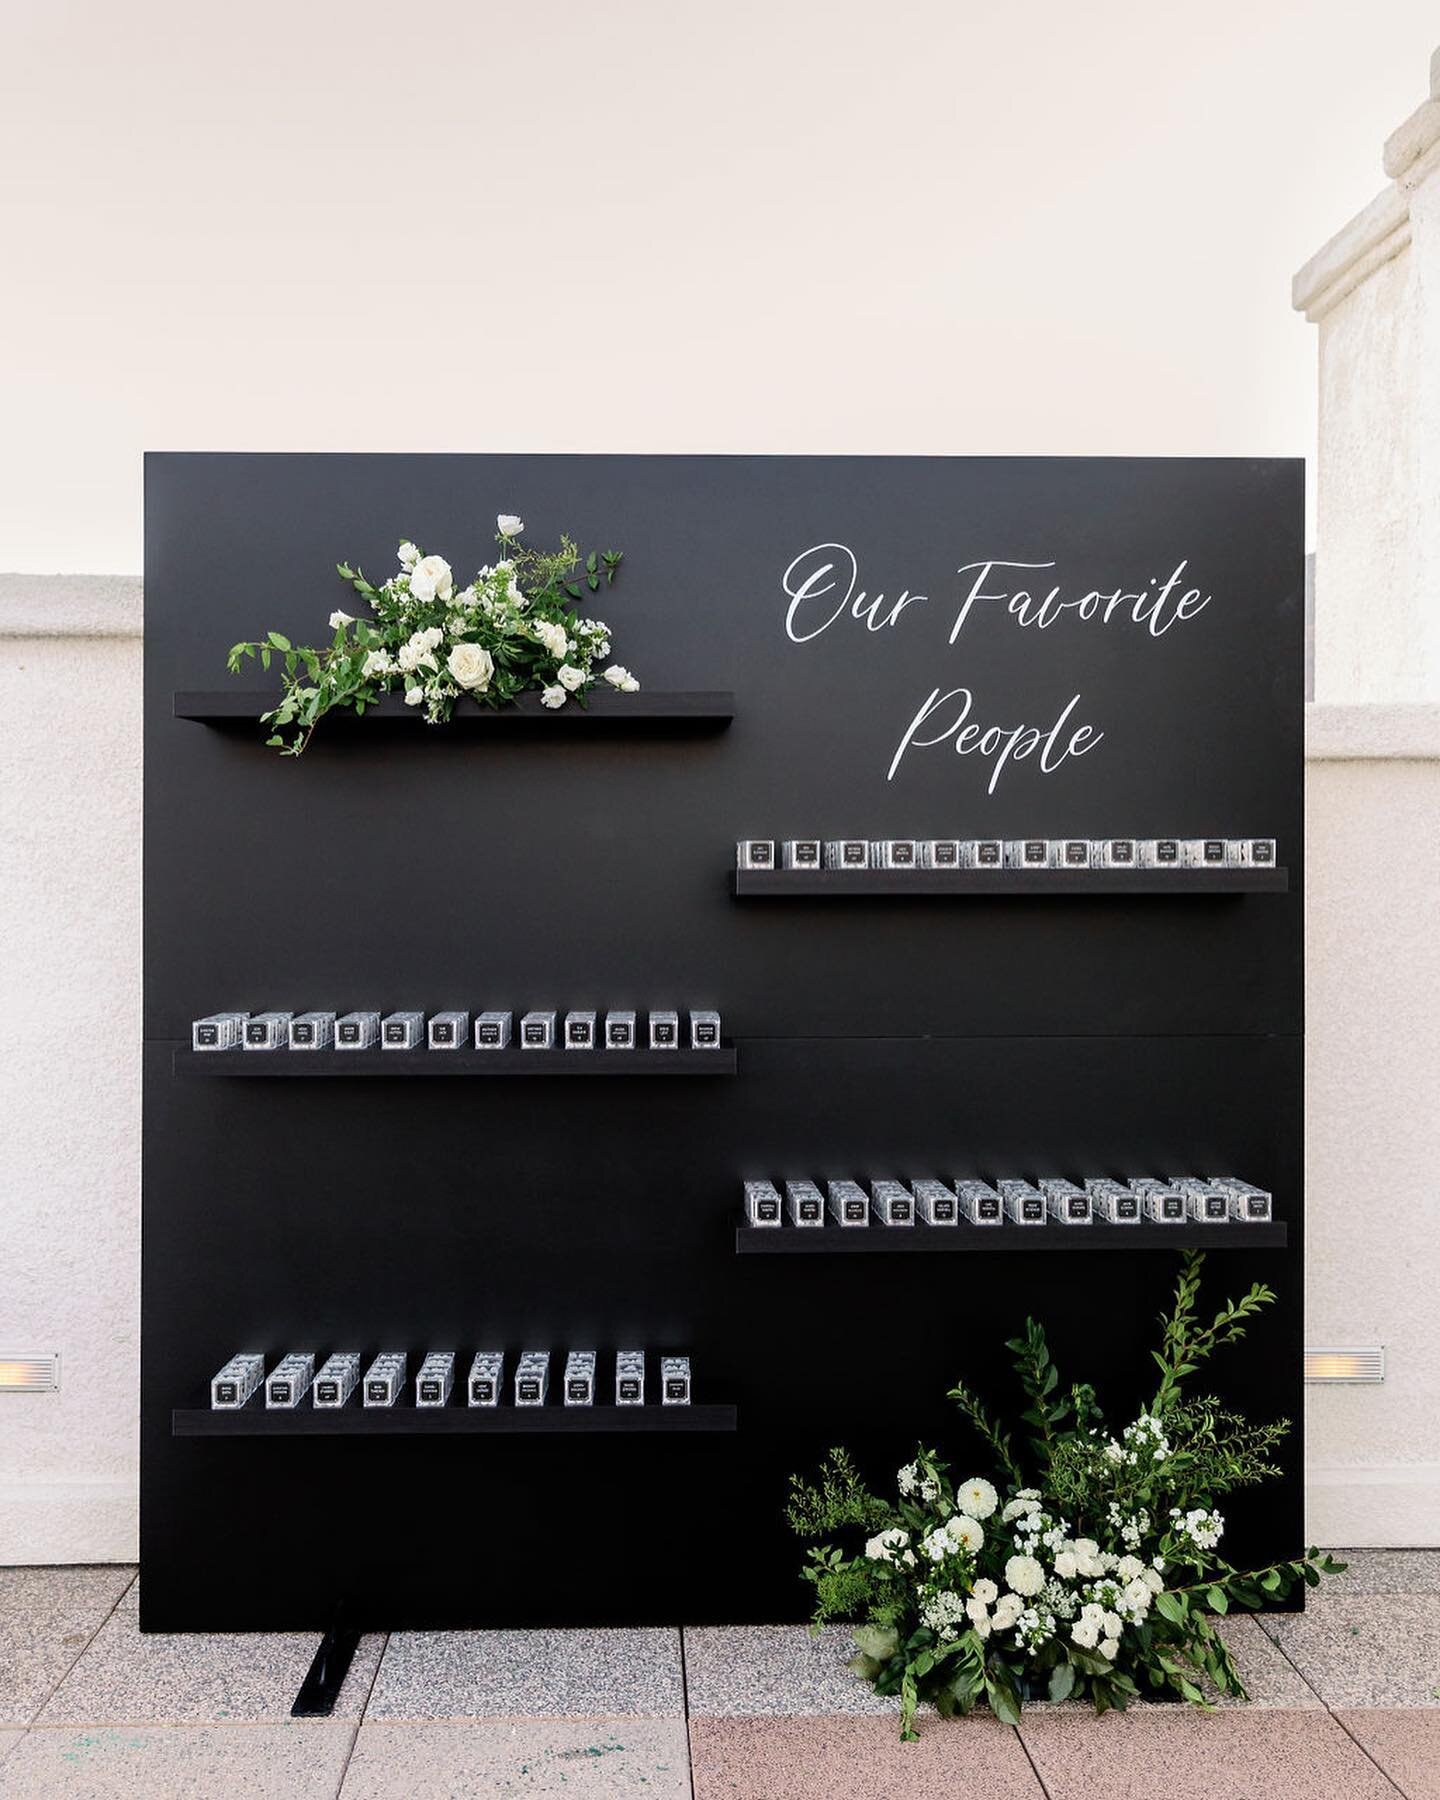 MAKE A STATEMENT | One of the first things your guests see when they enter your reception space is the seating chart or escort card display. Make an impression and create a fun photo moment for your guests that they will get them talking! Extra point